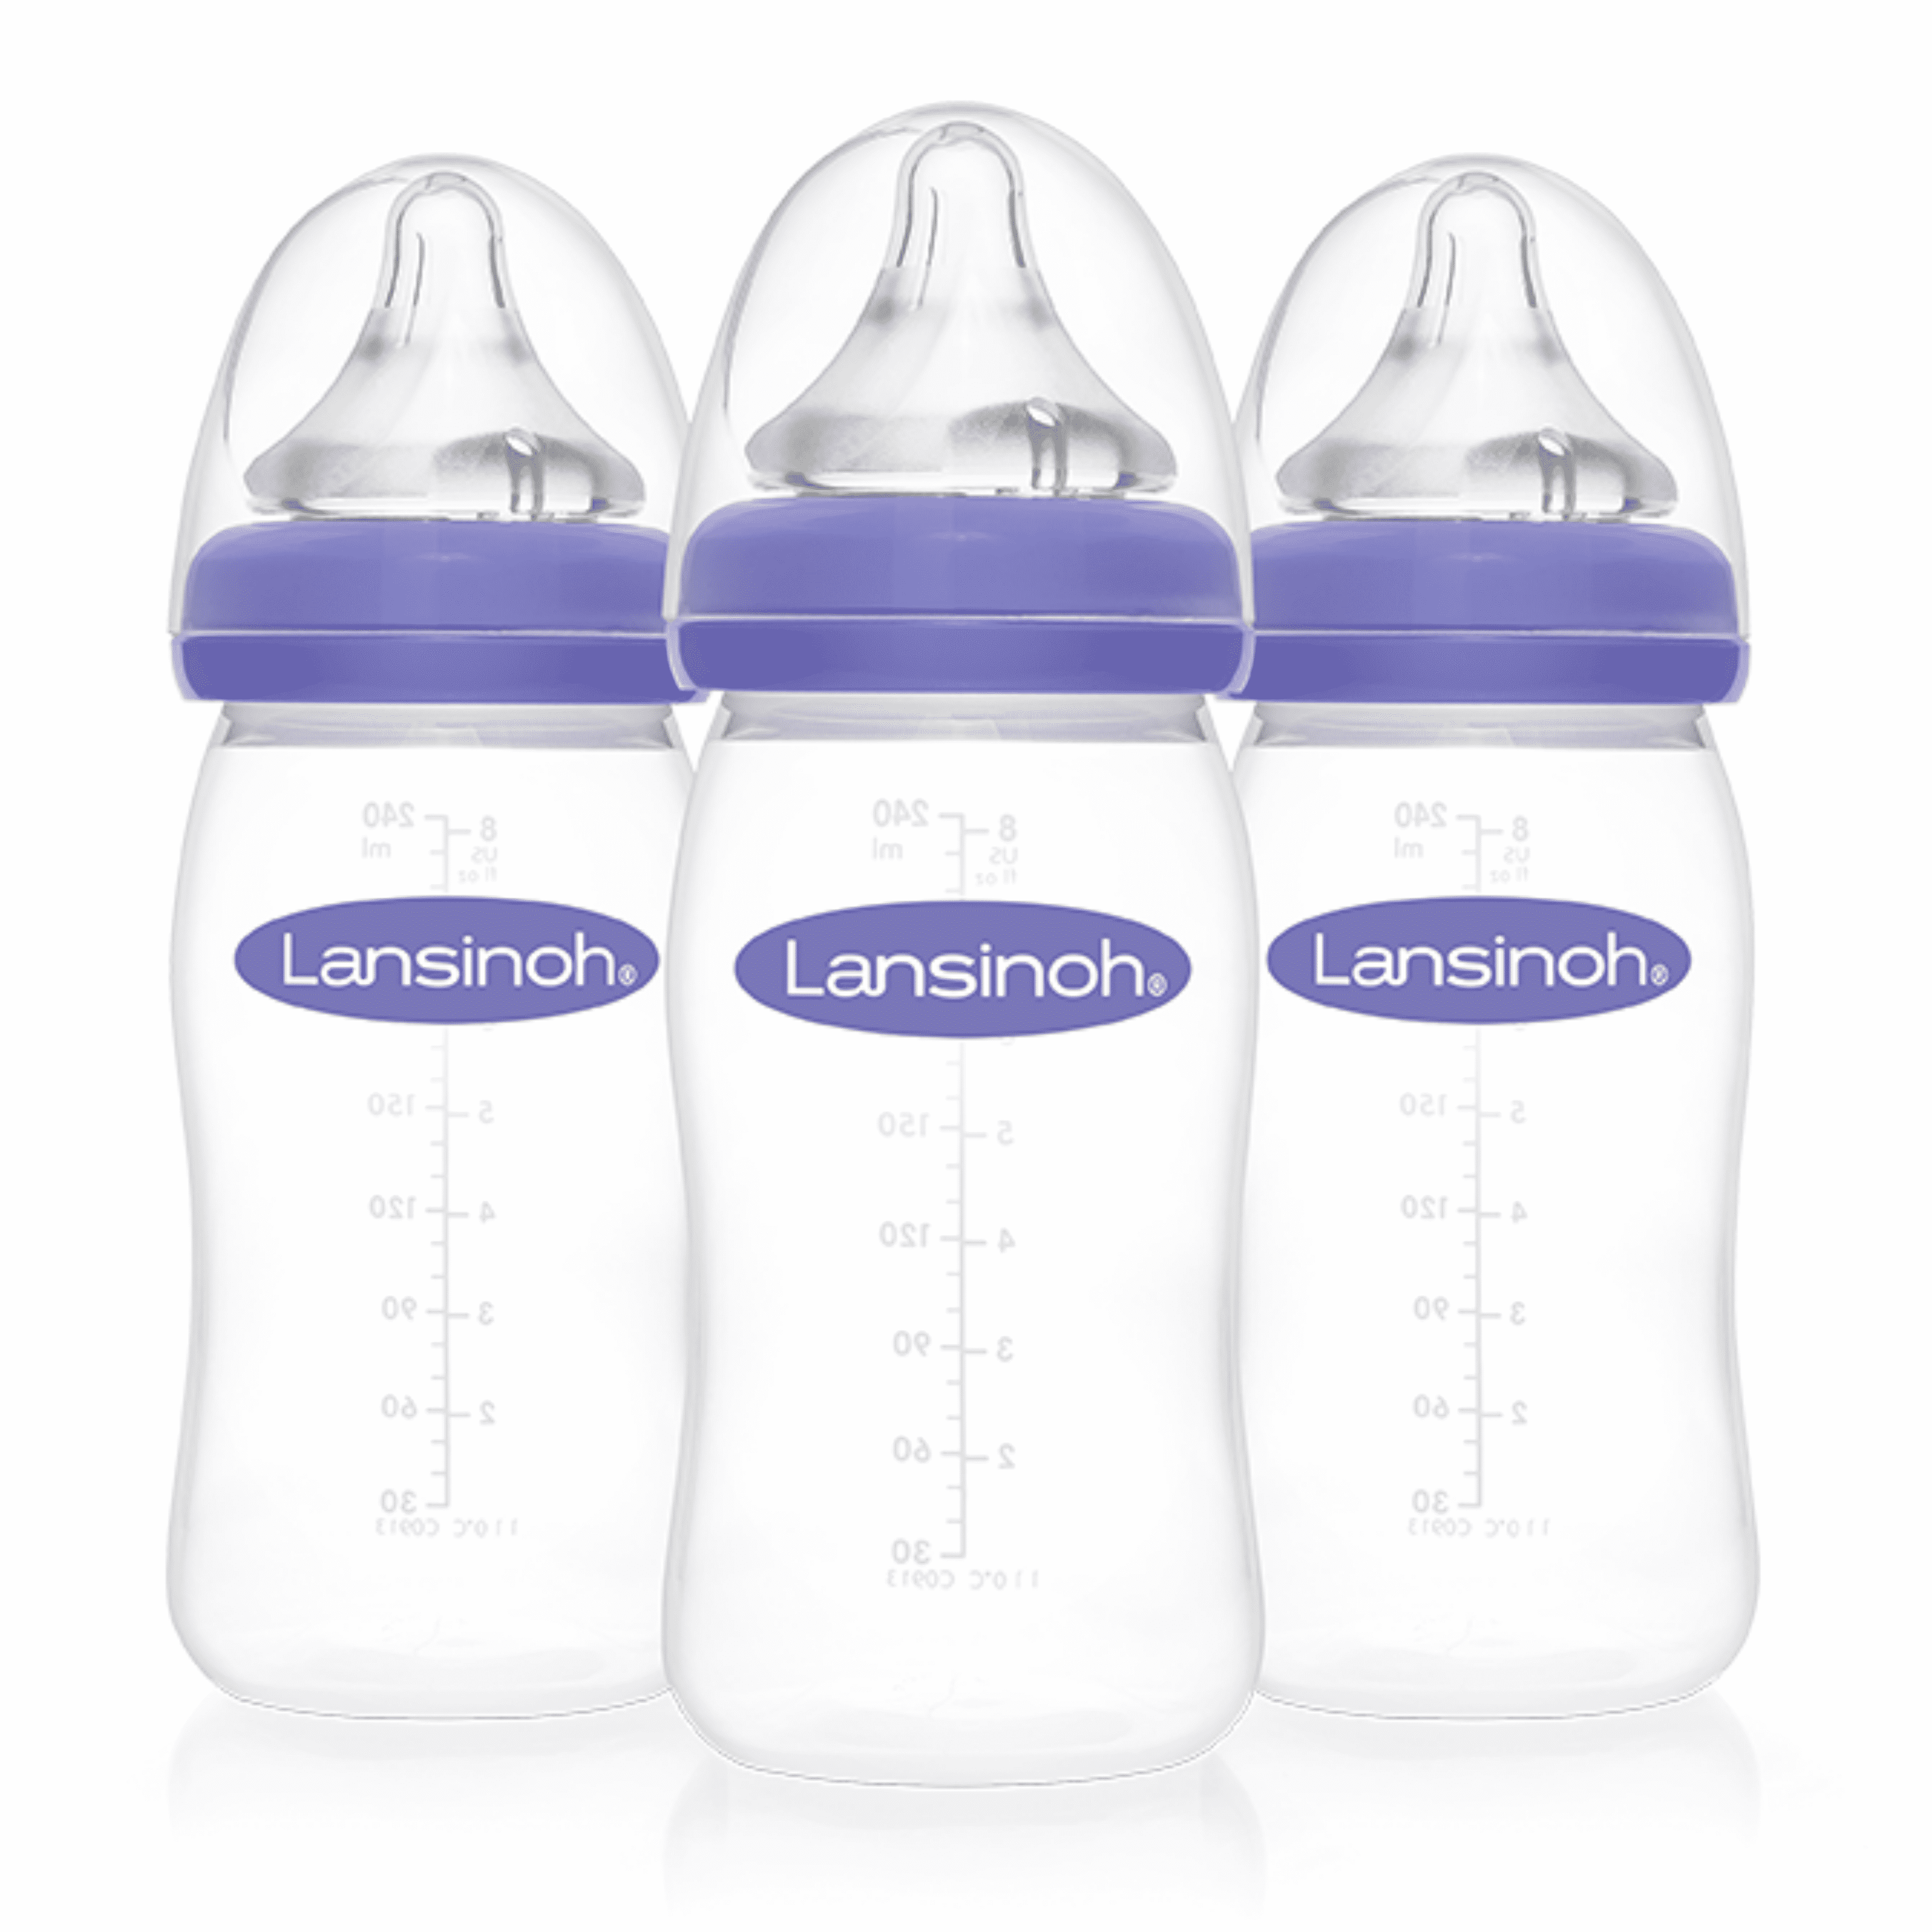 Lansinoh Baby Bottles for Breastfeeding Babies, 8 Ounces, 3 count ...